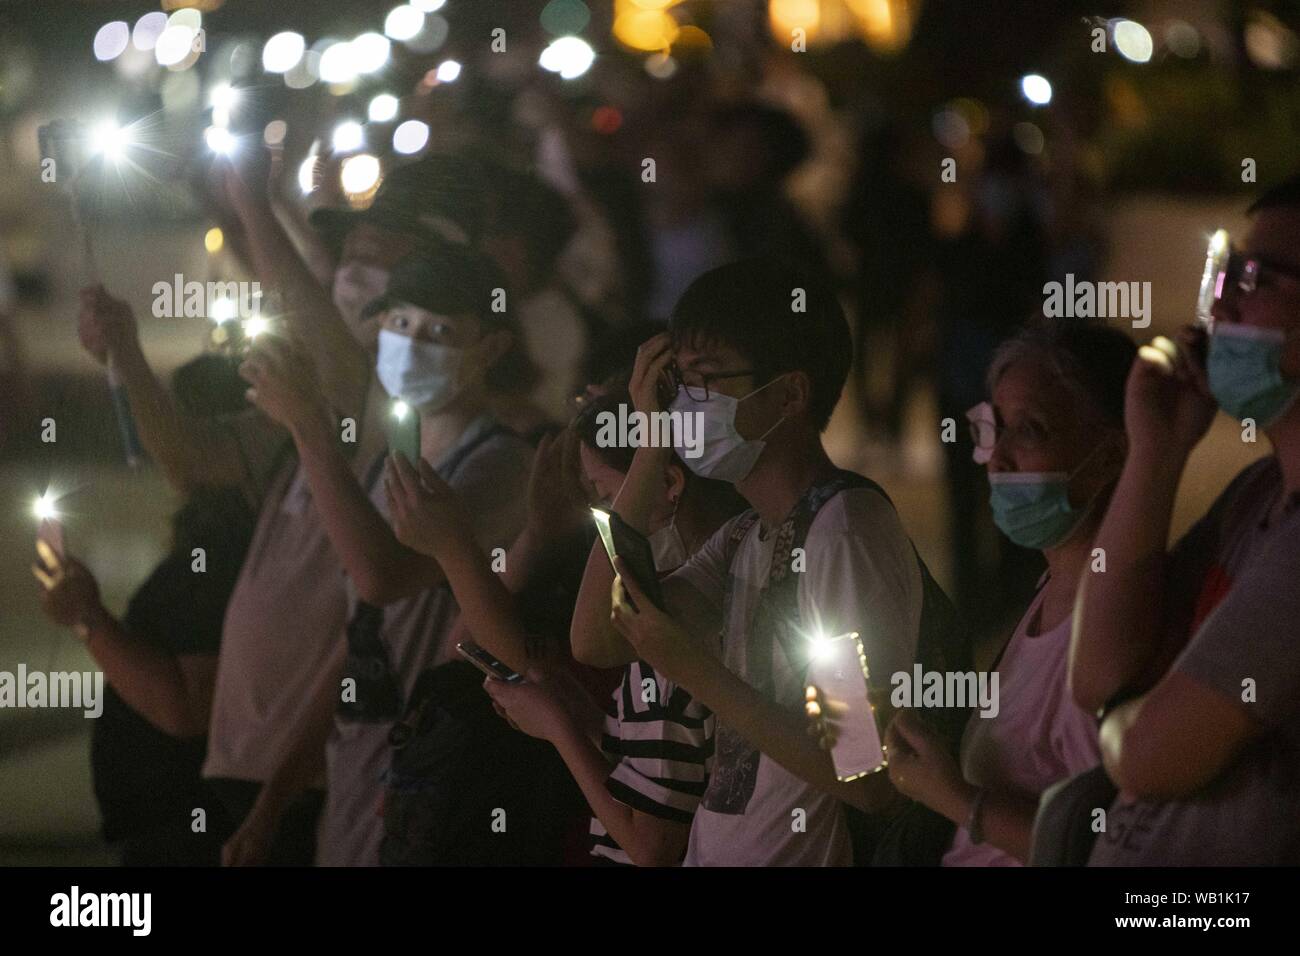 Tsim Sha Tsui, Hong Kong S.A.R. 23rd Aug, 2019. Thousands of protesters create the Hong Kong Human Chain along Hong Kong's Avenue of the Stars on the Victoria Harbor waterfront on the 30th annivesary of the Balkan Human Chain as part of the ongoing pro democracy anti elab protest movement. Credit: Adryel Talamantes/ZUMA Wire/Alamy Live News Stock Photo